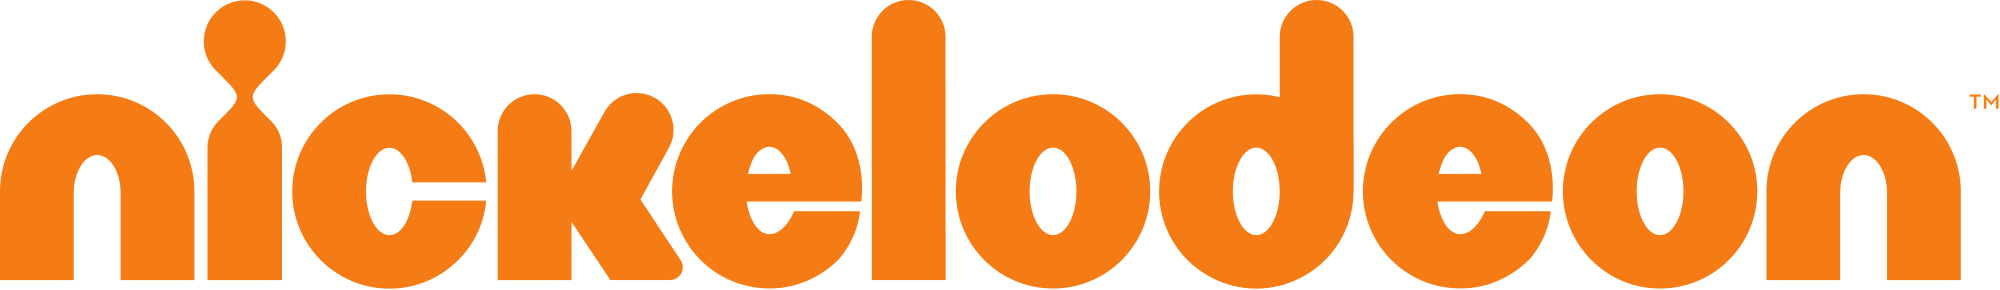 nickelodeon logo - moving & storage company in NEW YORK & NEW JERSEY